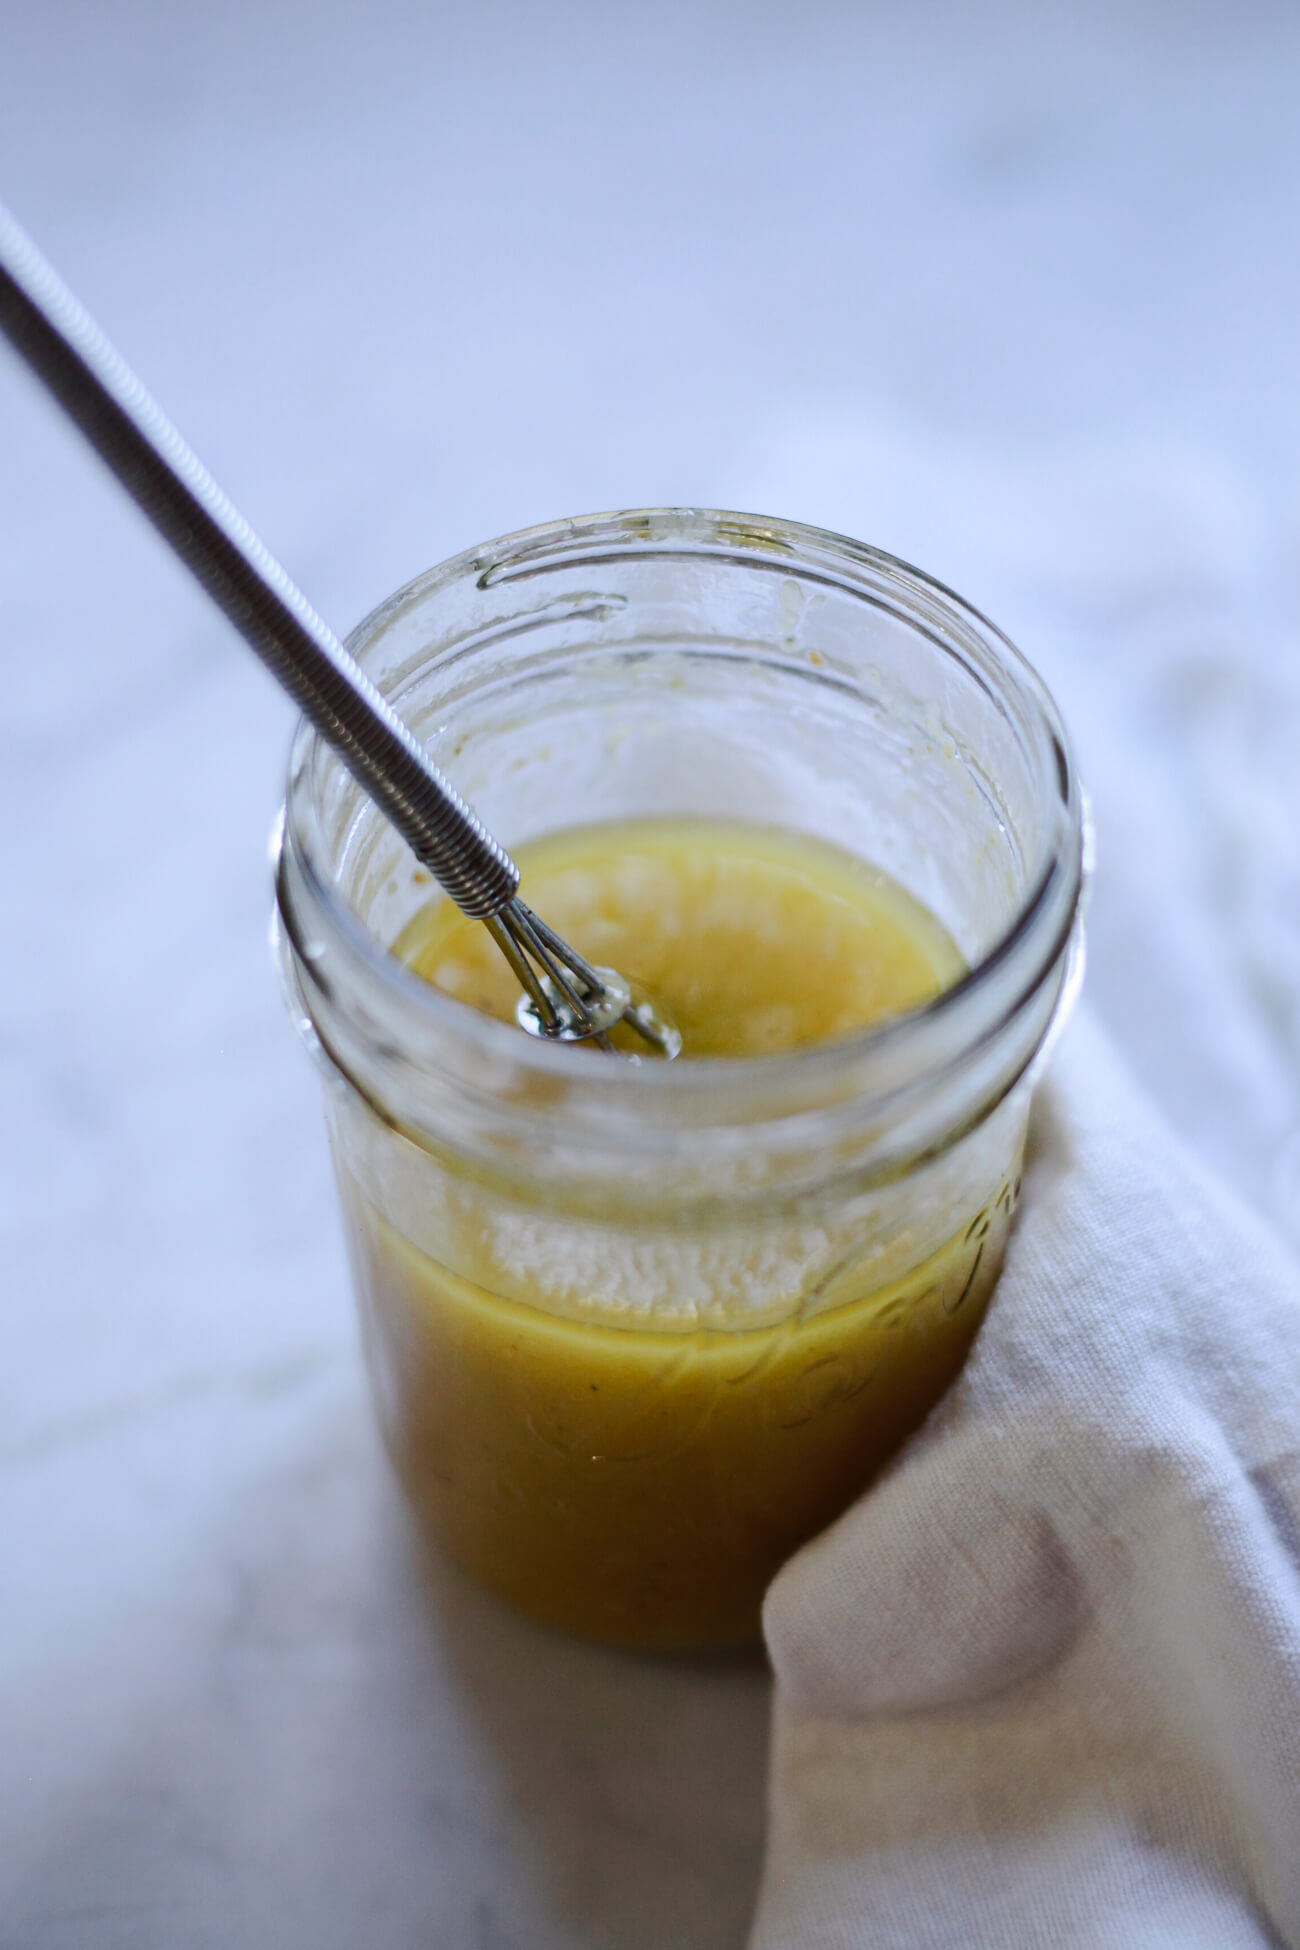 A small jar filled with a homemade lemon Dijon vinaigrette with a small whisk.